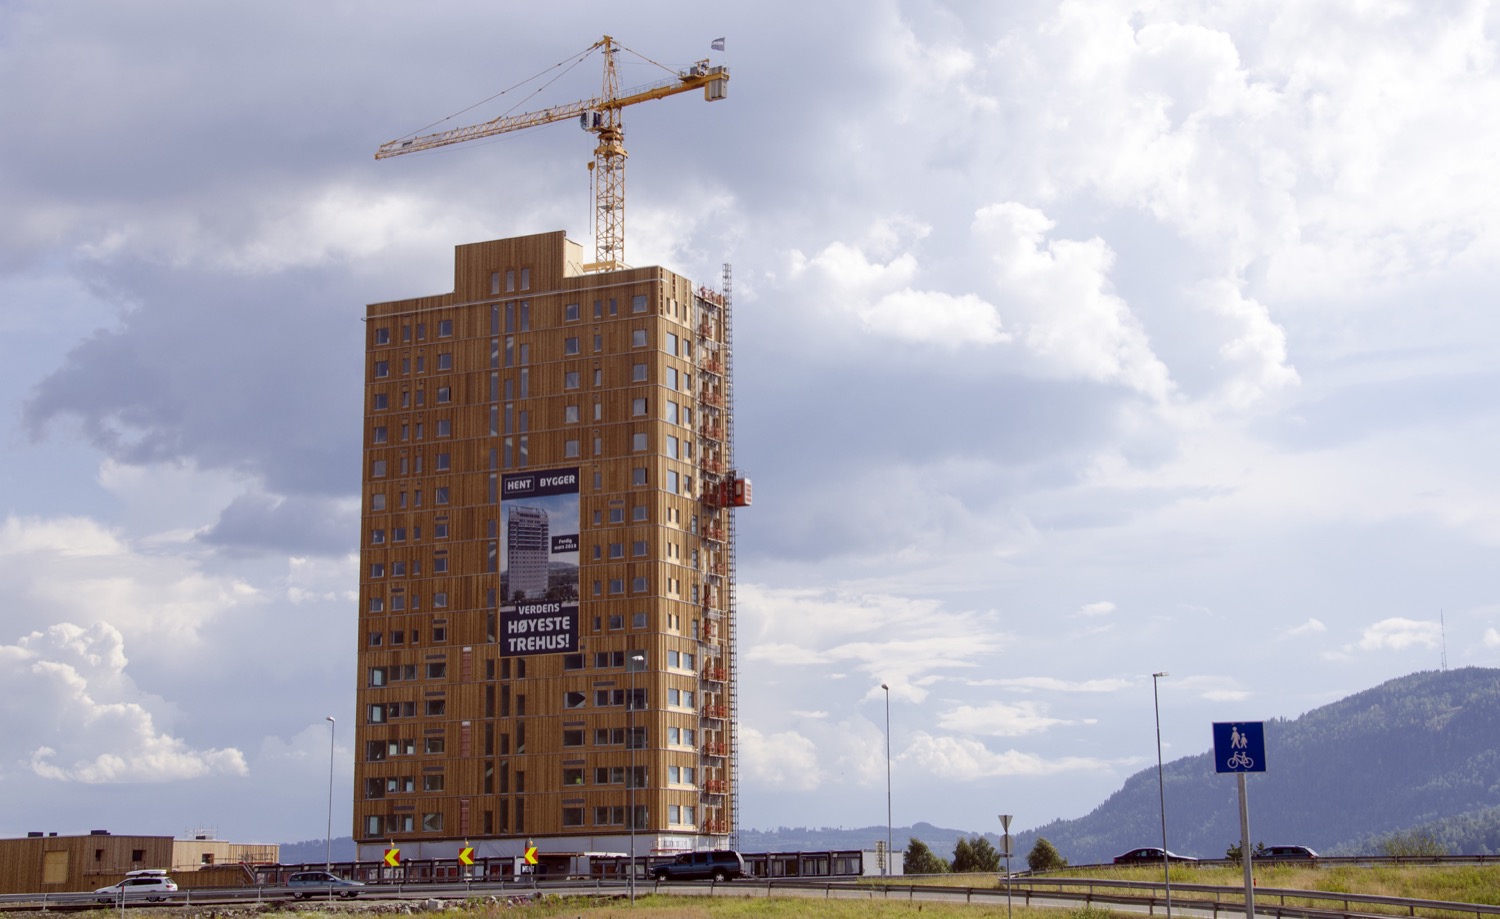 An 18-story tall wood building with a crane above it